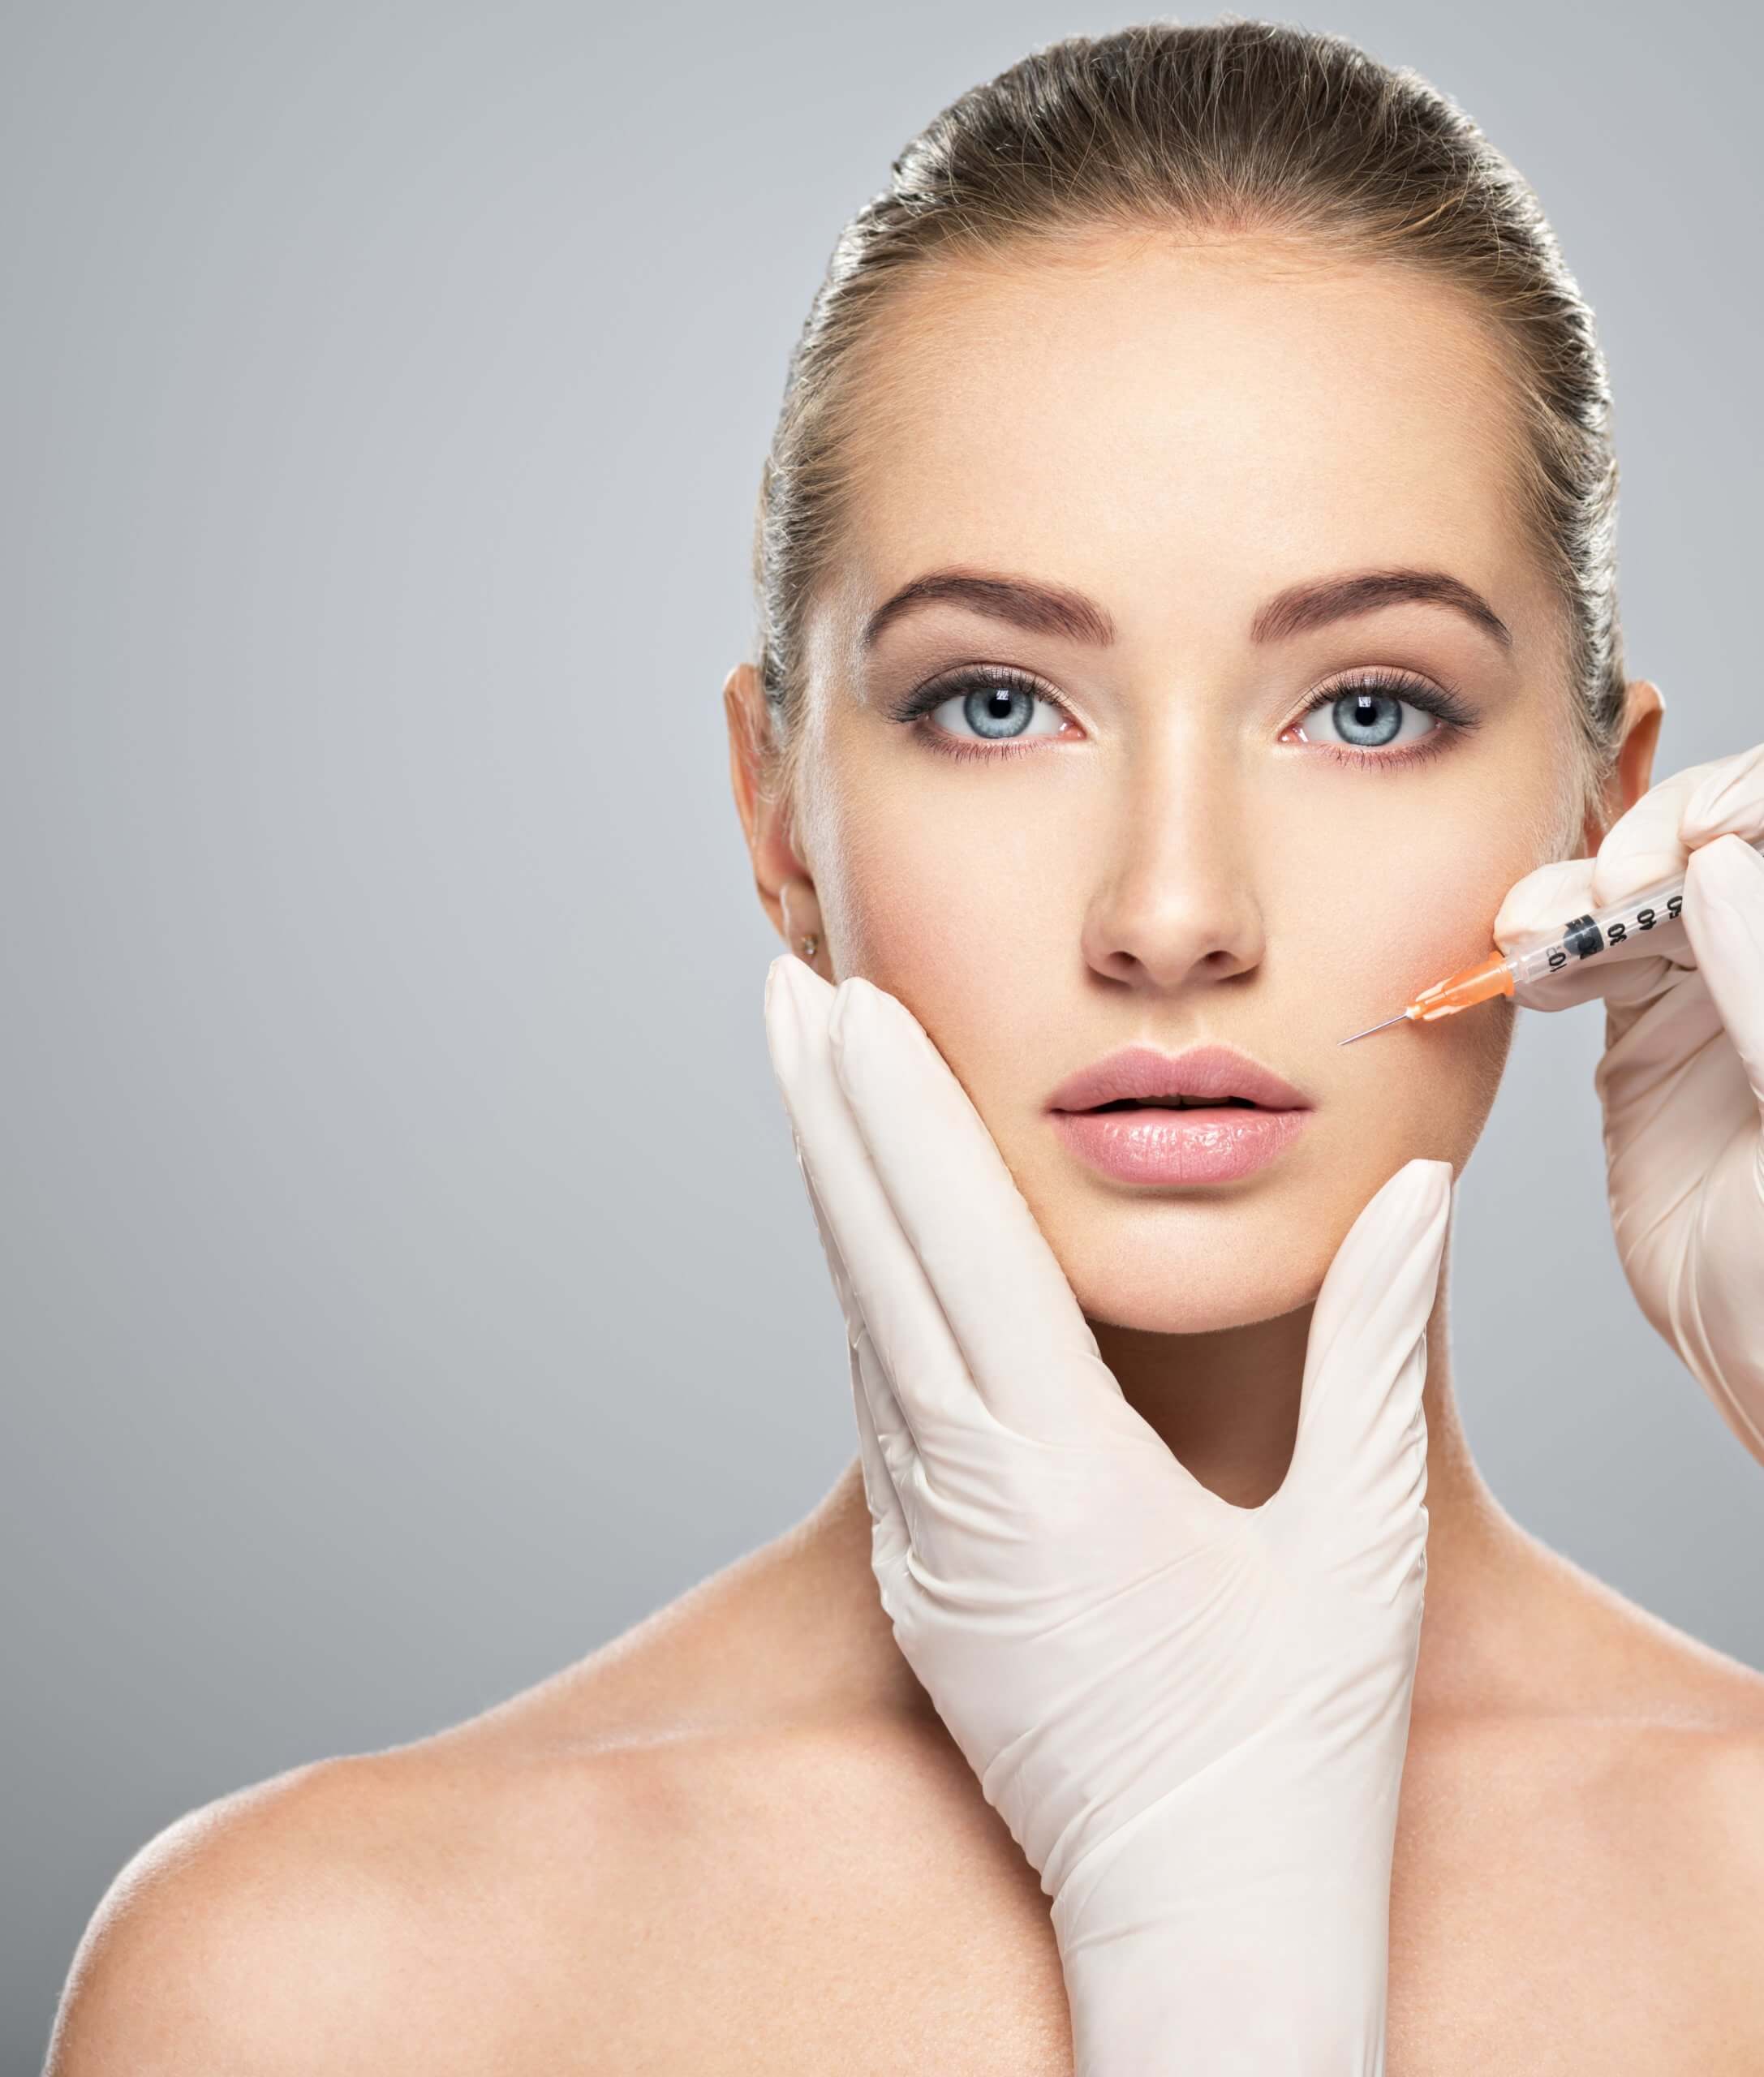 What You Should Know Before Getting Fillers